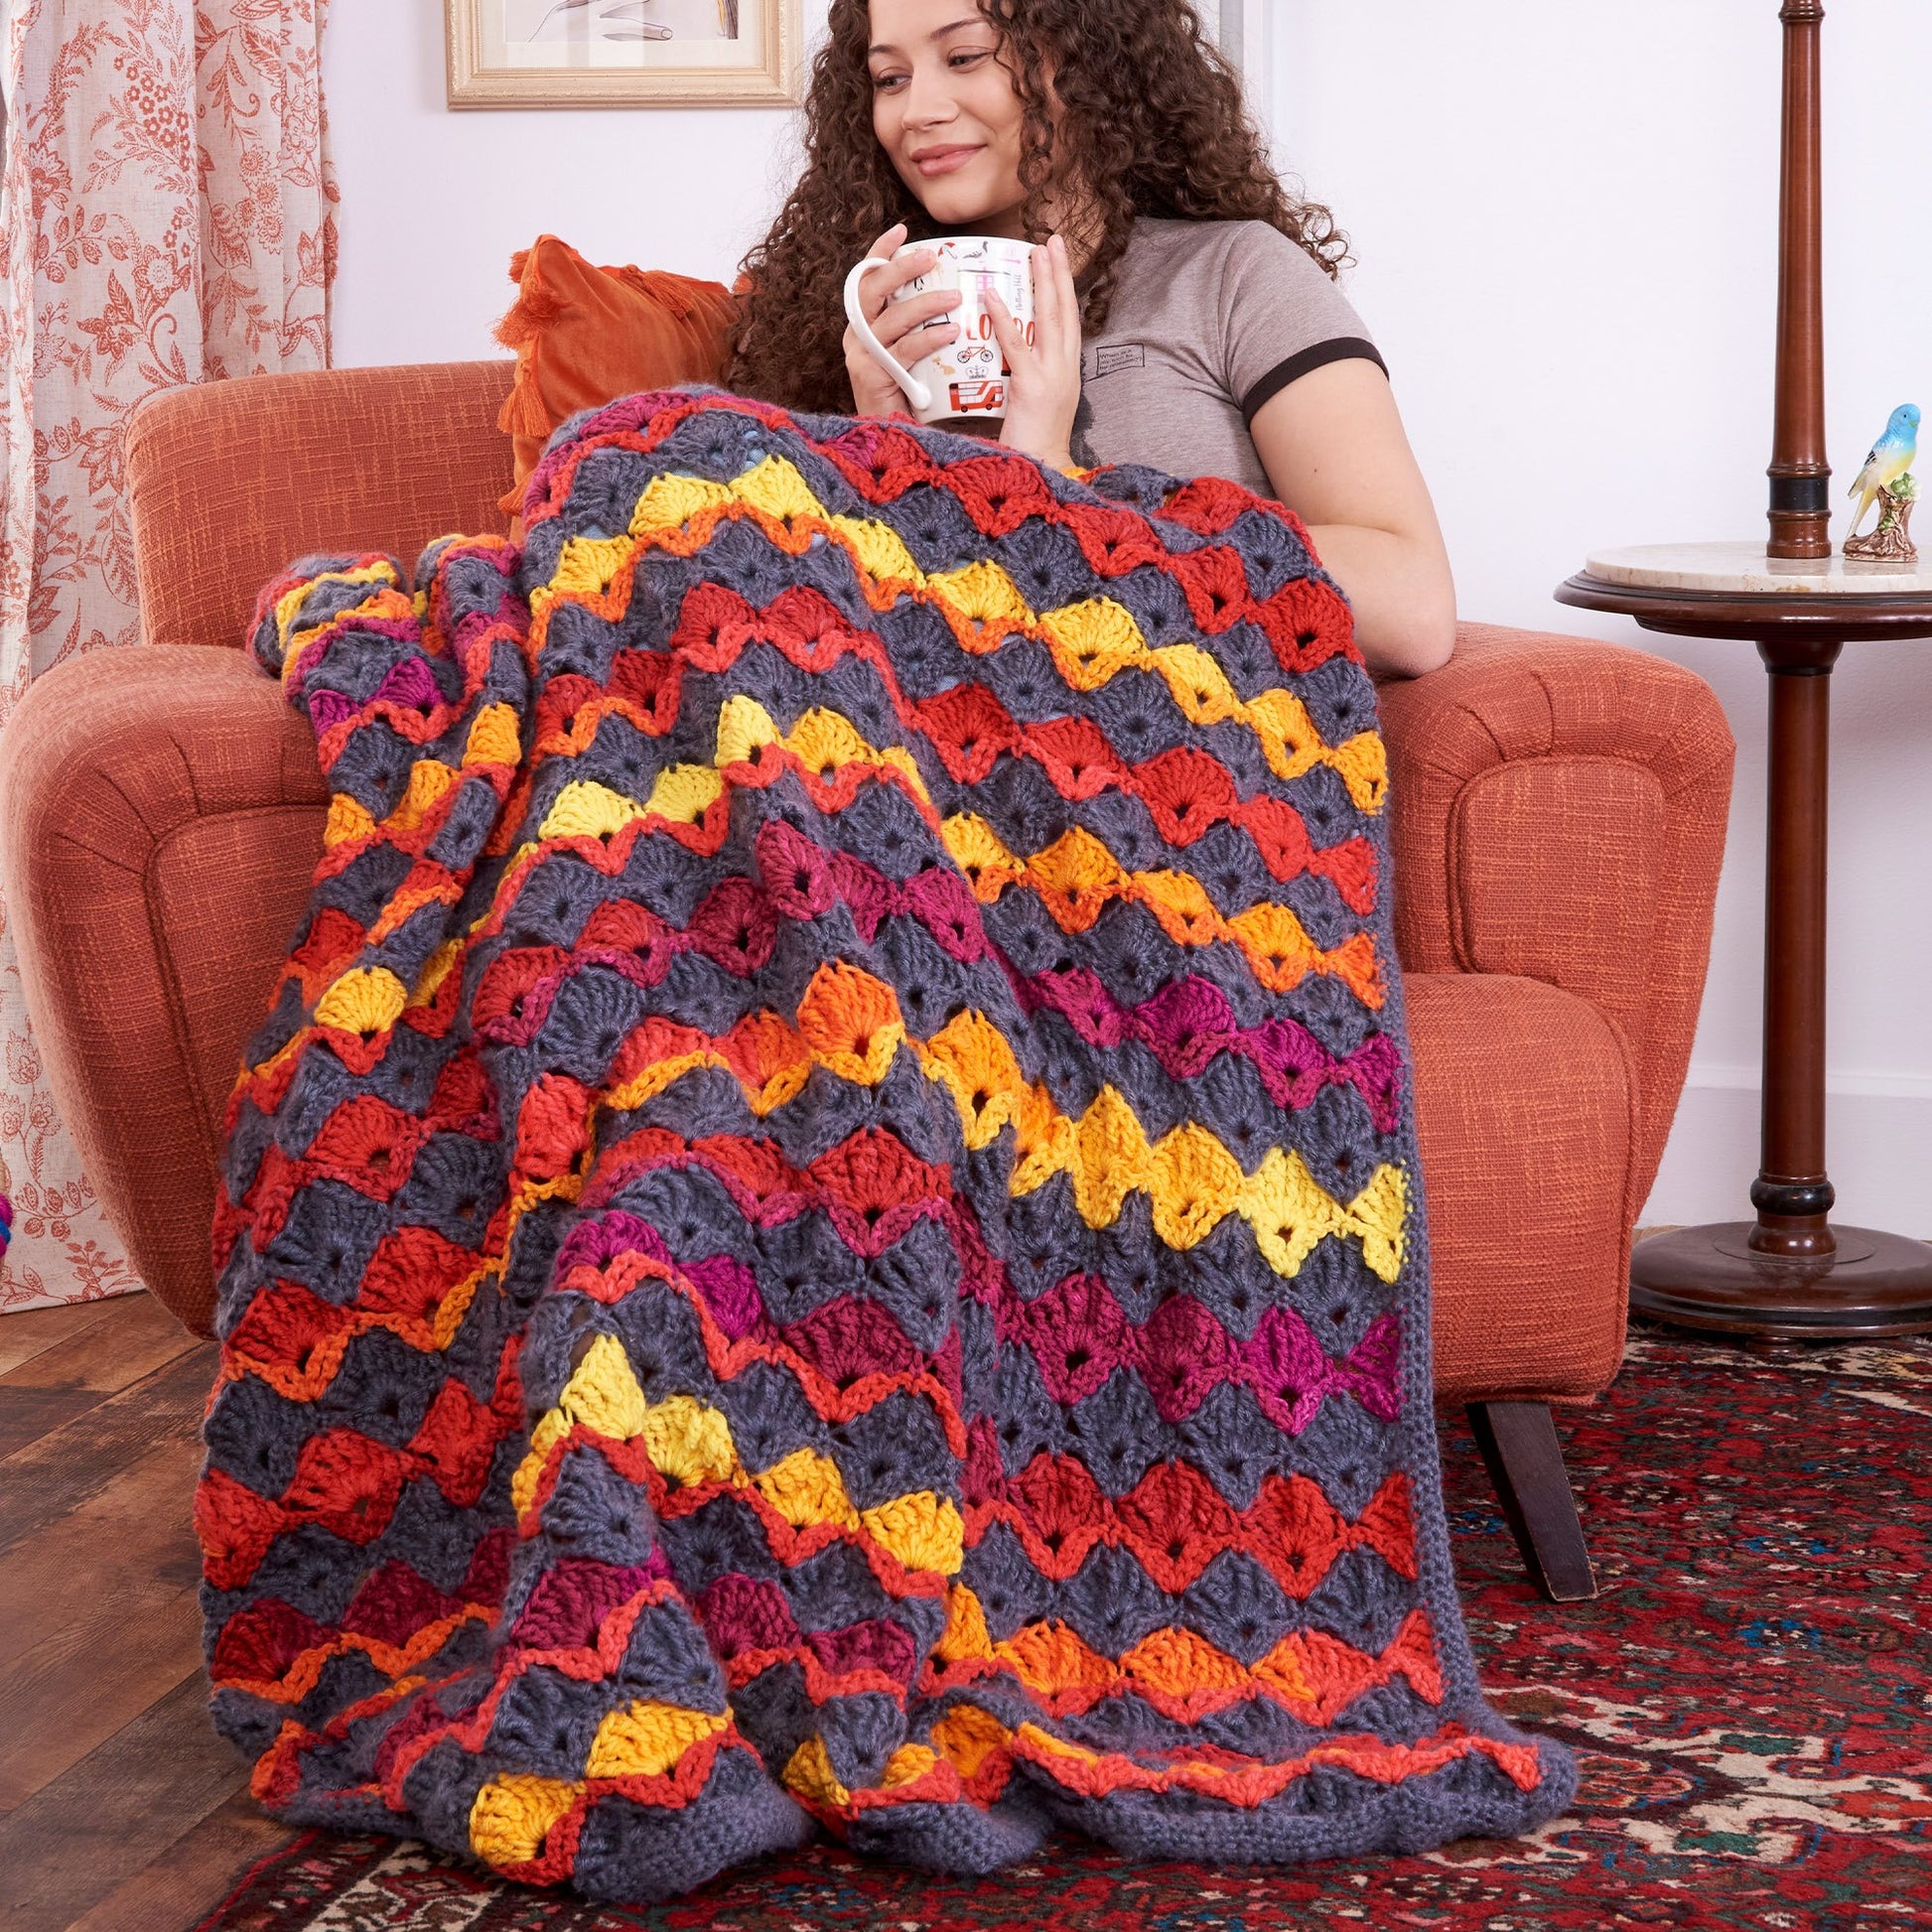 Free Red Heart Pixel Perfect Crochet Afghan Pattern